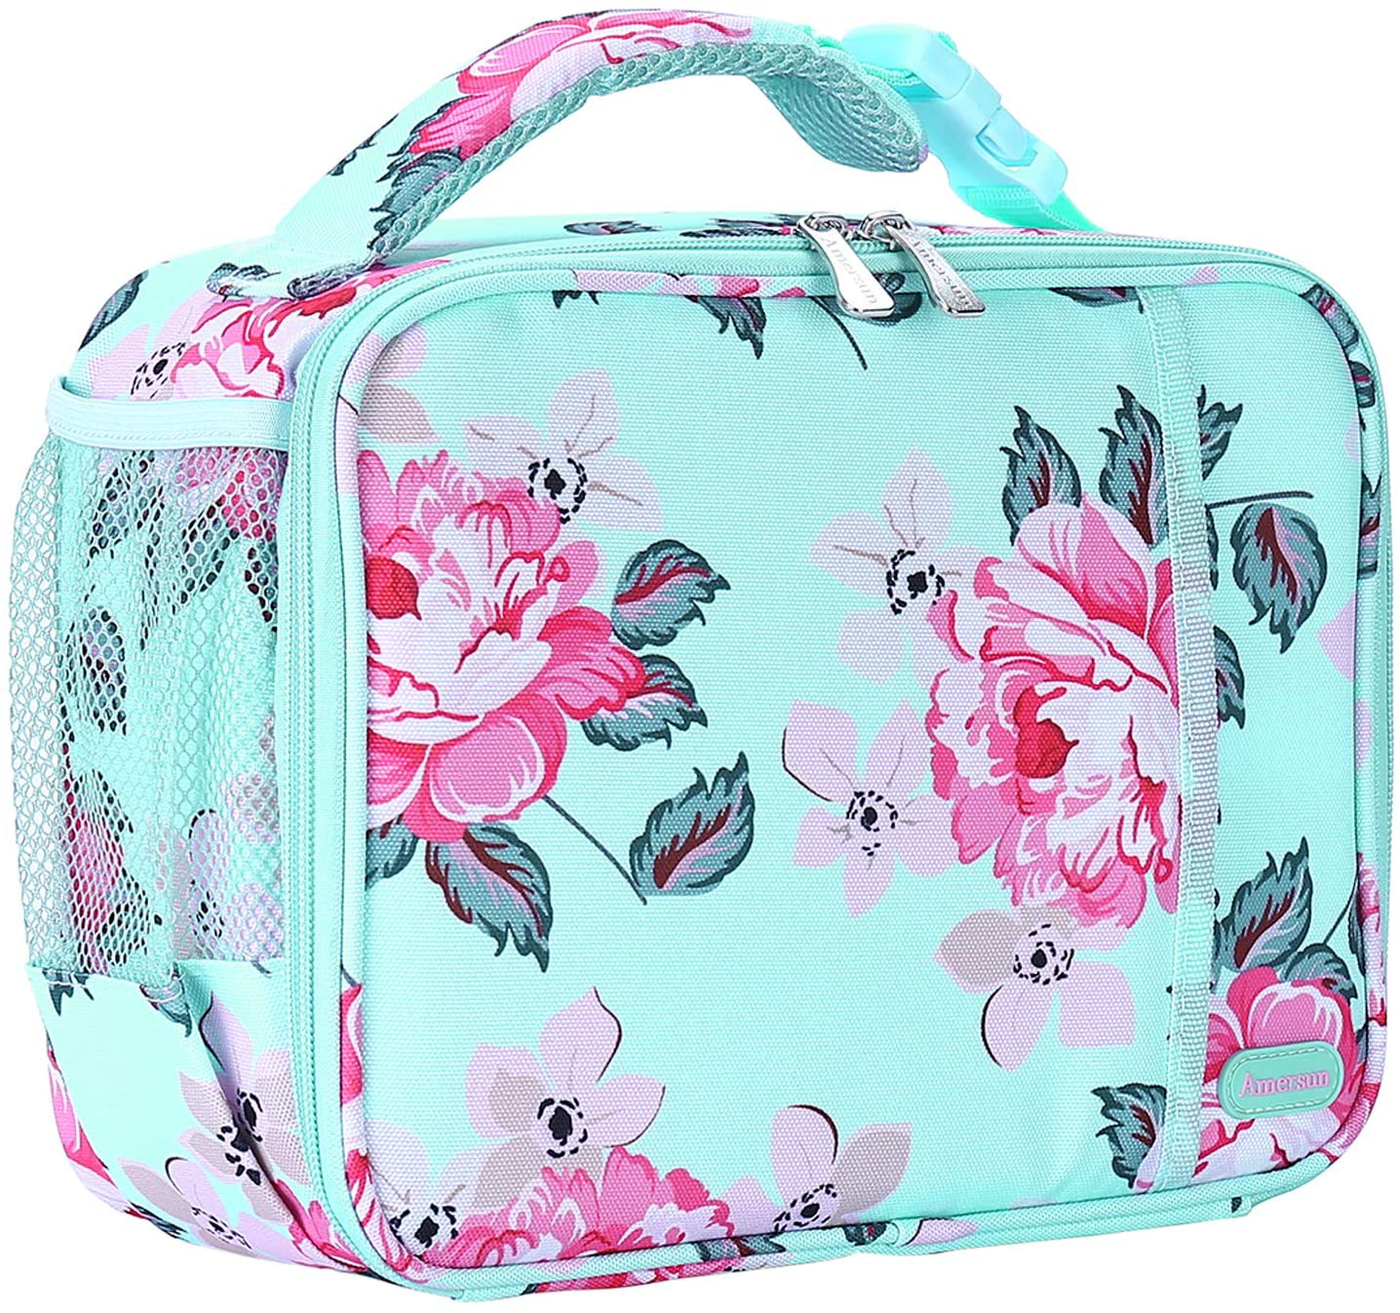 Kids Lunch Box with Supper Padded Inner Keep Food Cold Warm for Longer Time,Amersun Leak-proof Solid Insulated School Lunch Bag with Multi-Pocket for Teen Boys Girls,CPC Certified,Light Rose